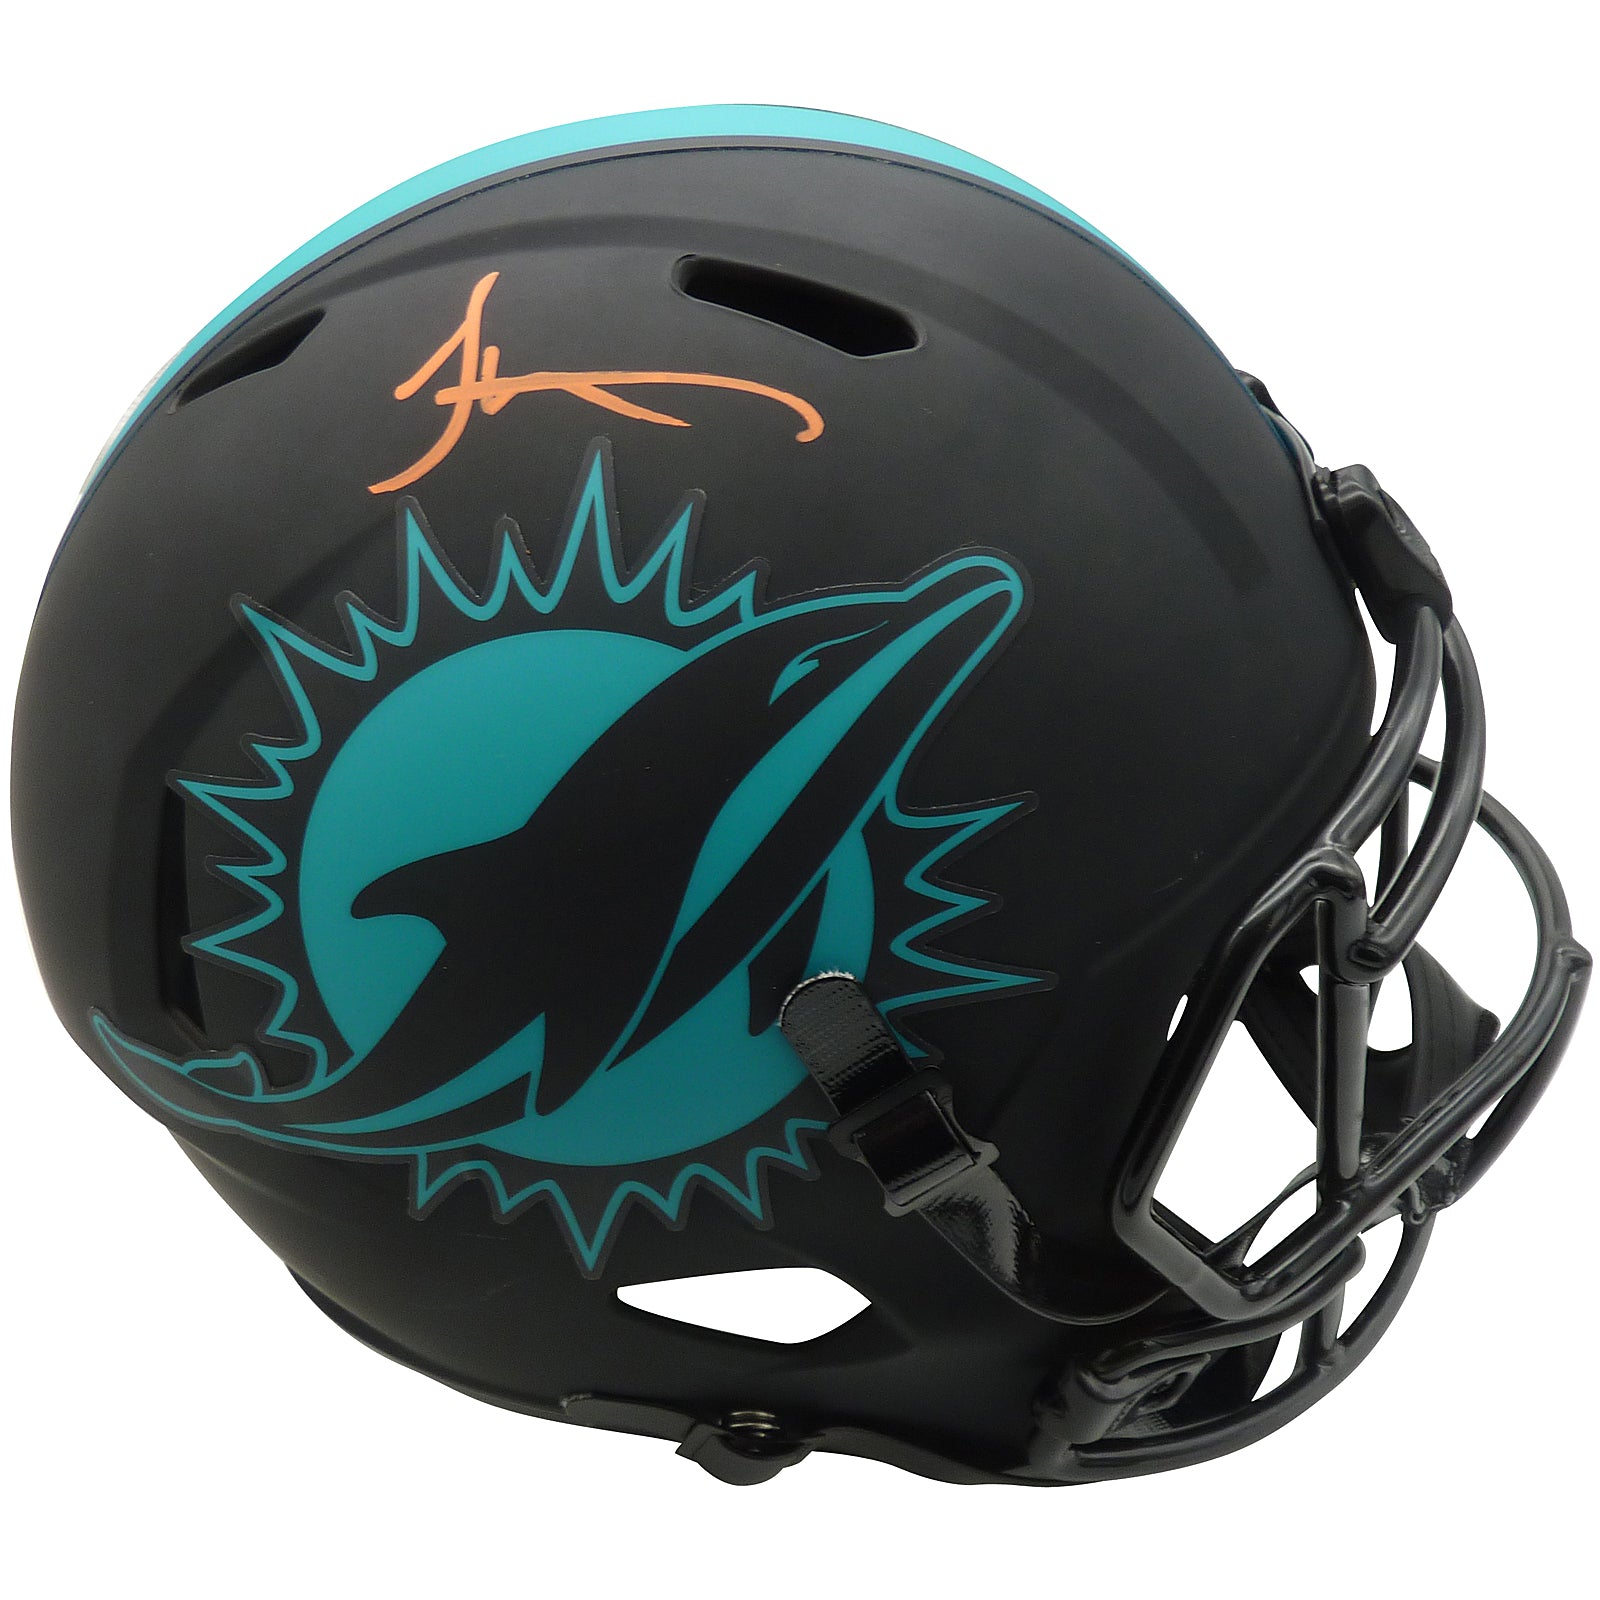 Tyreek Hill Autographed Miami Dolphins (ECLIPSE Alternate) Deluxe Full-Size Replica Helmet - BAS